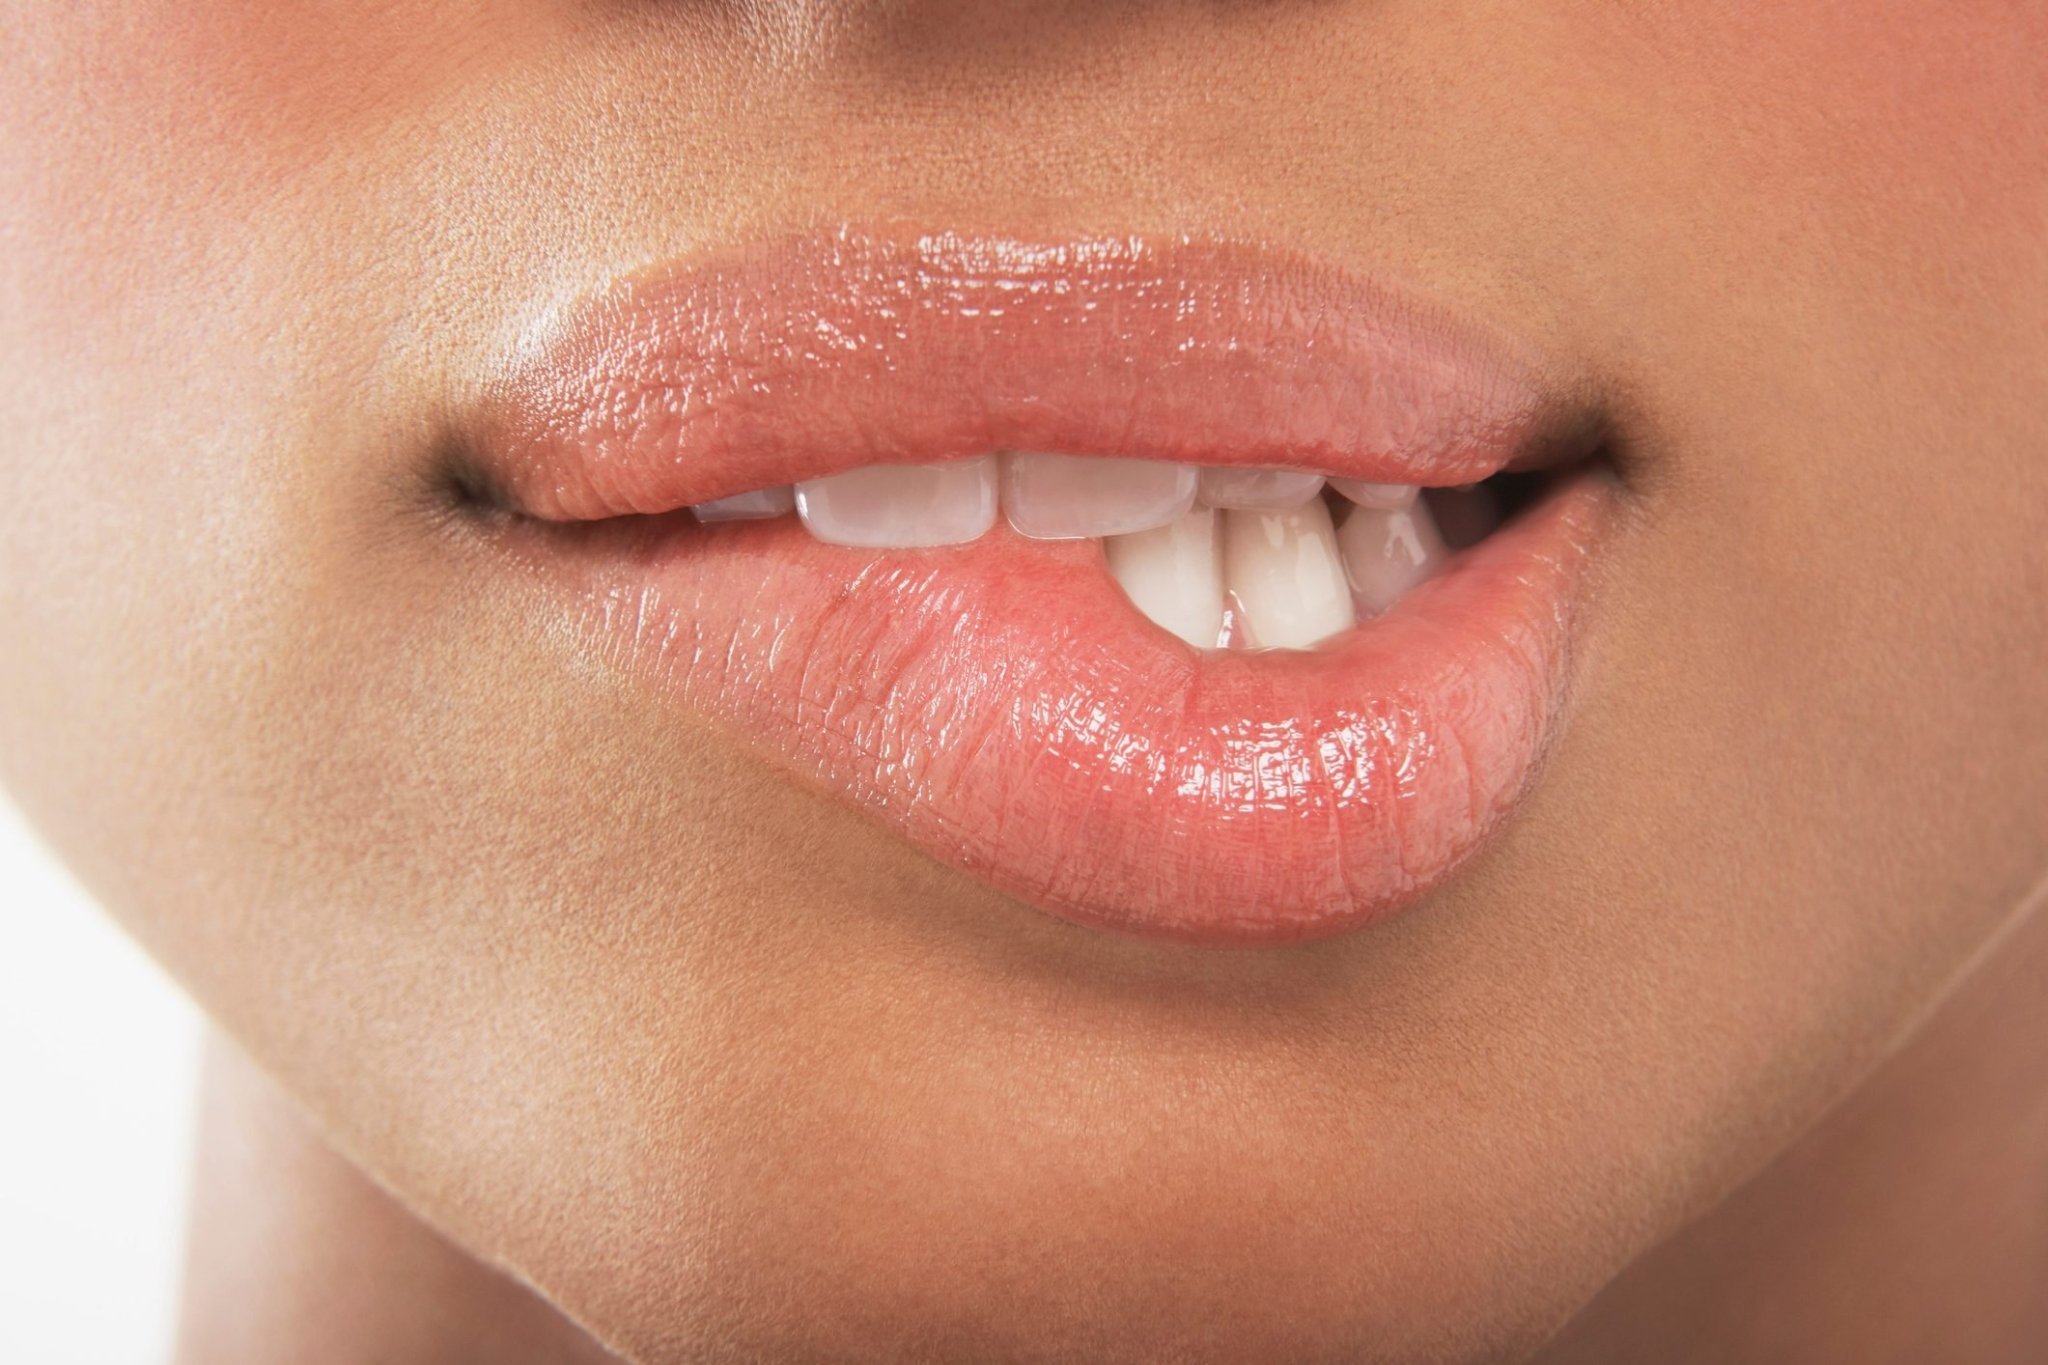 What Does a Black Spot on Your Lip Mean?